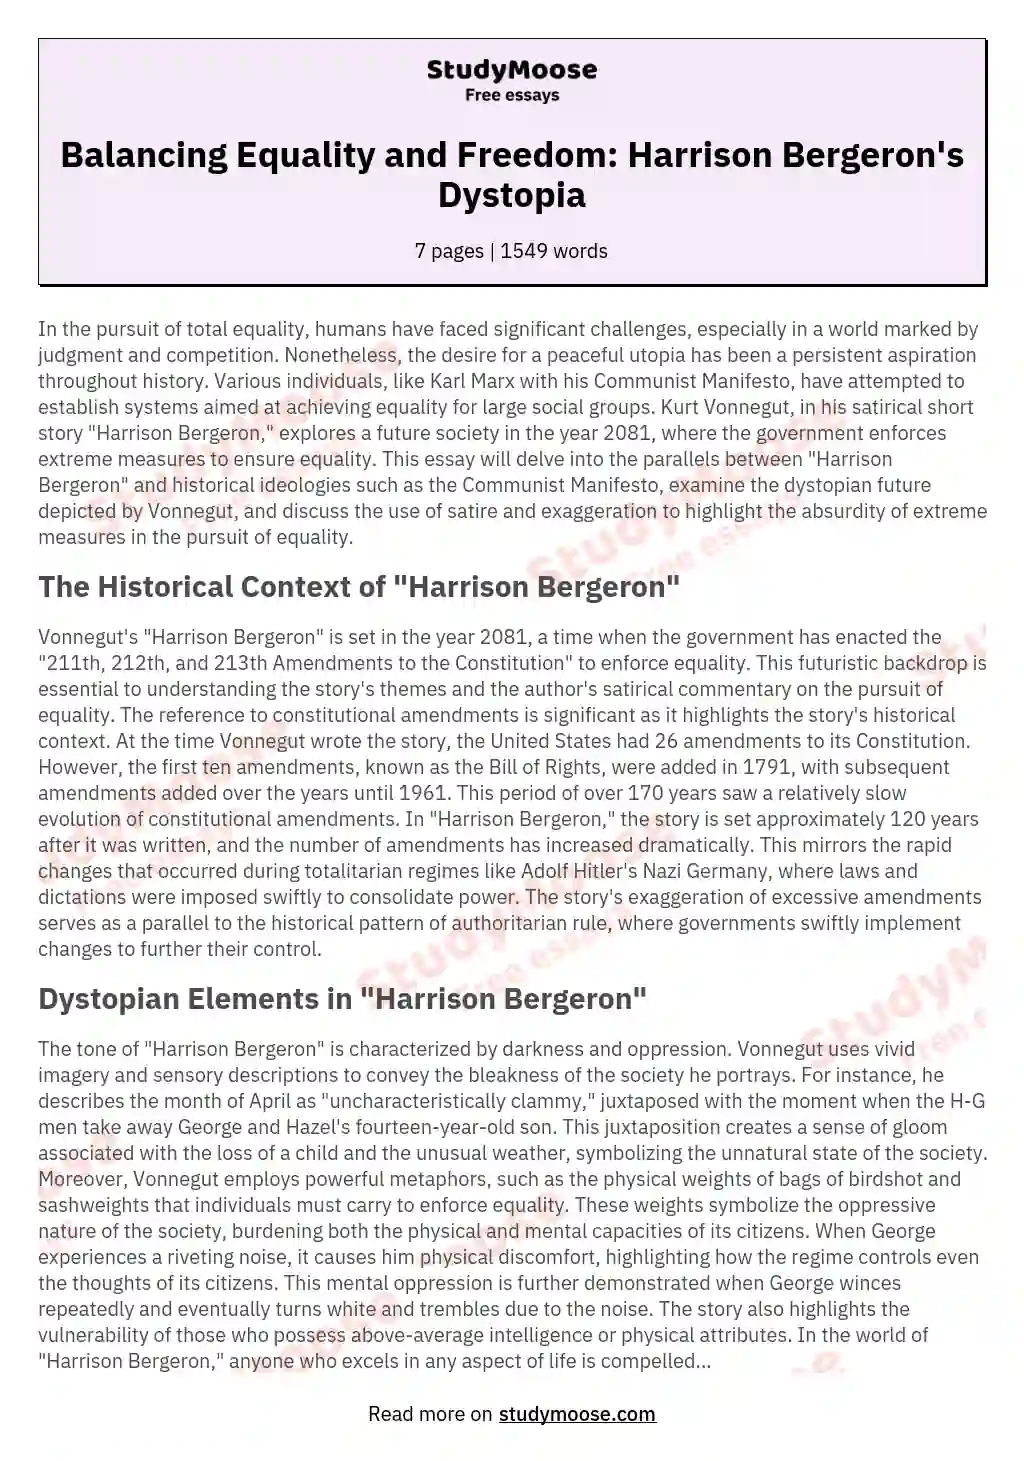 what is the thesis of harrison bergeron